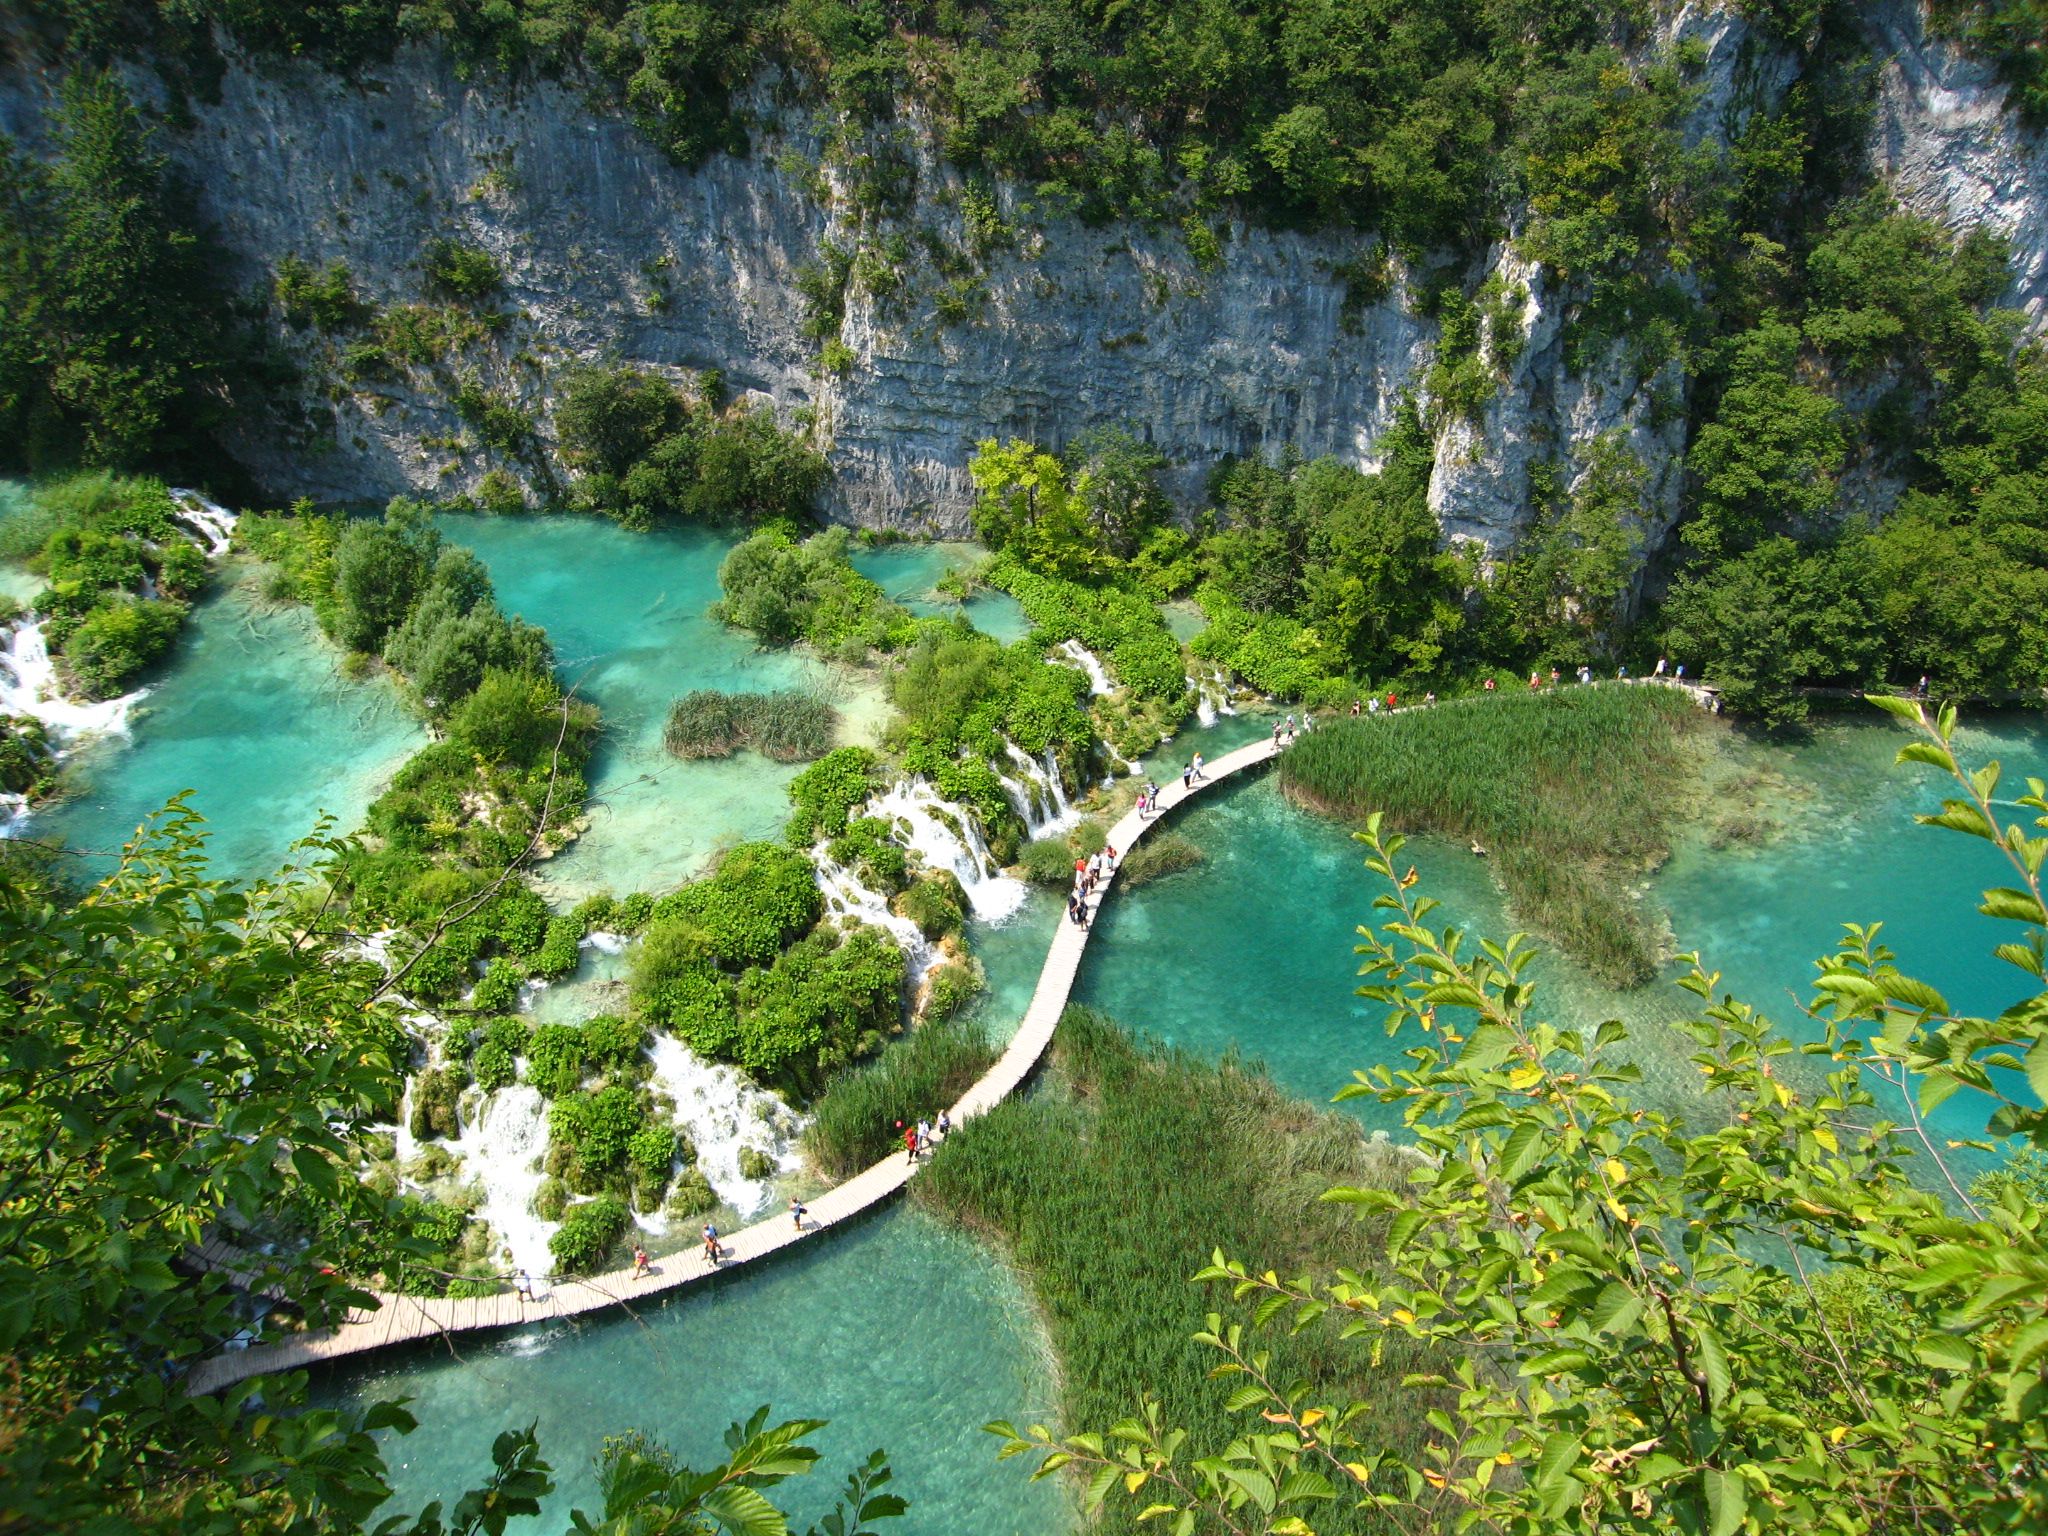 A wonderful discovery, the Plitvice lakes in Croatia